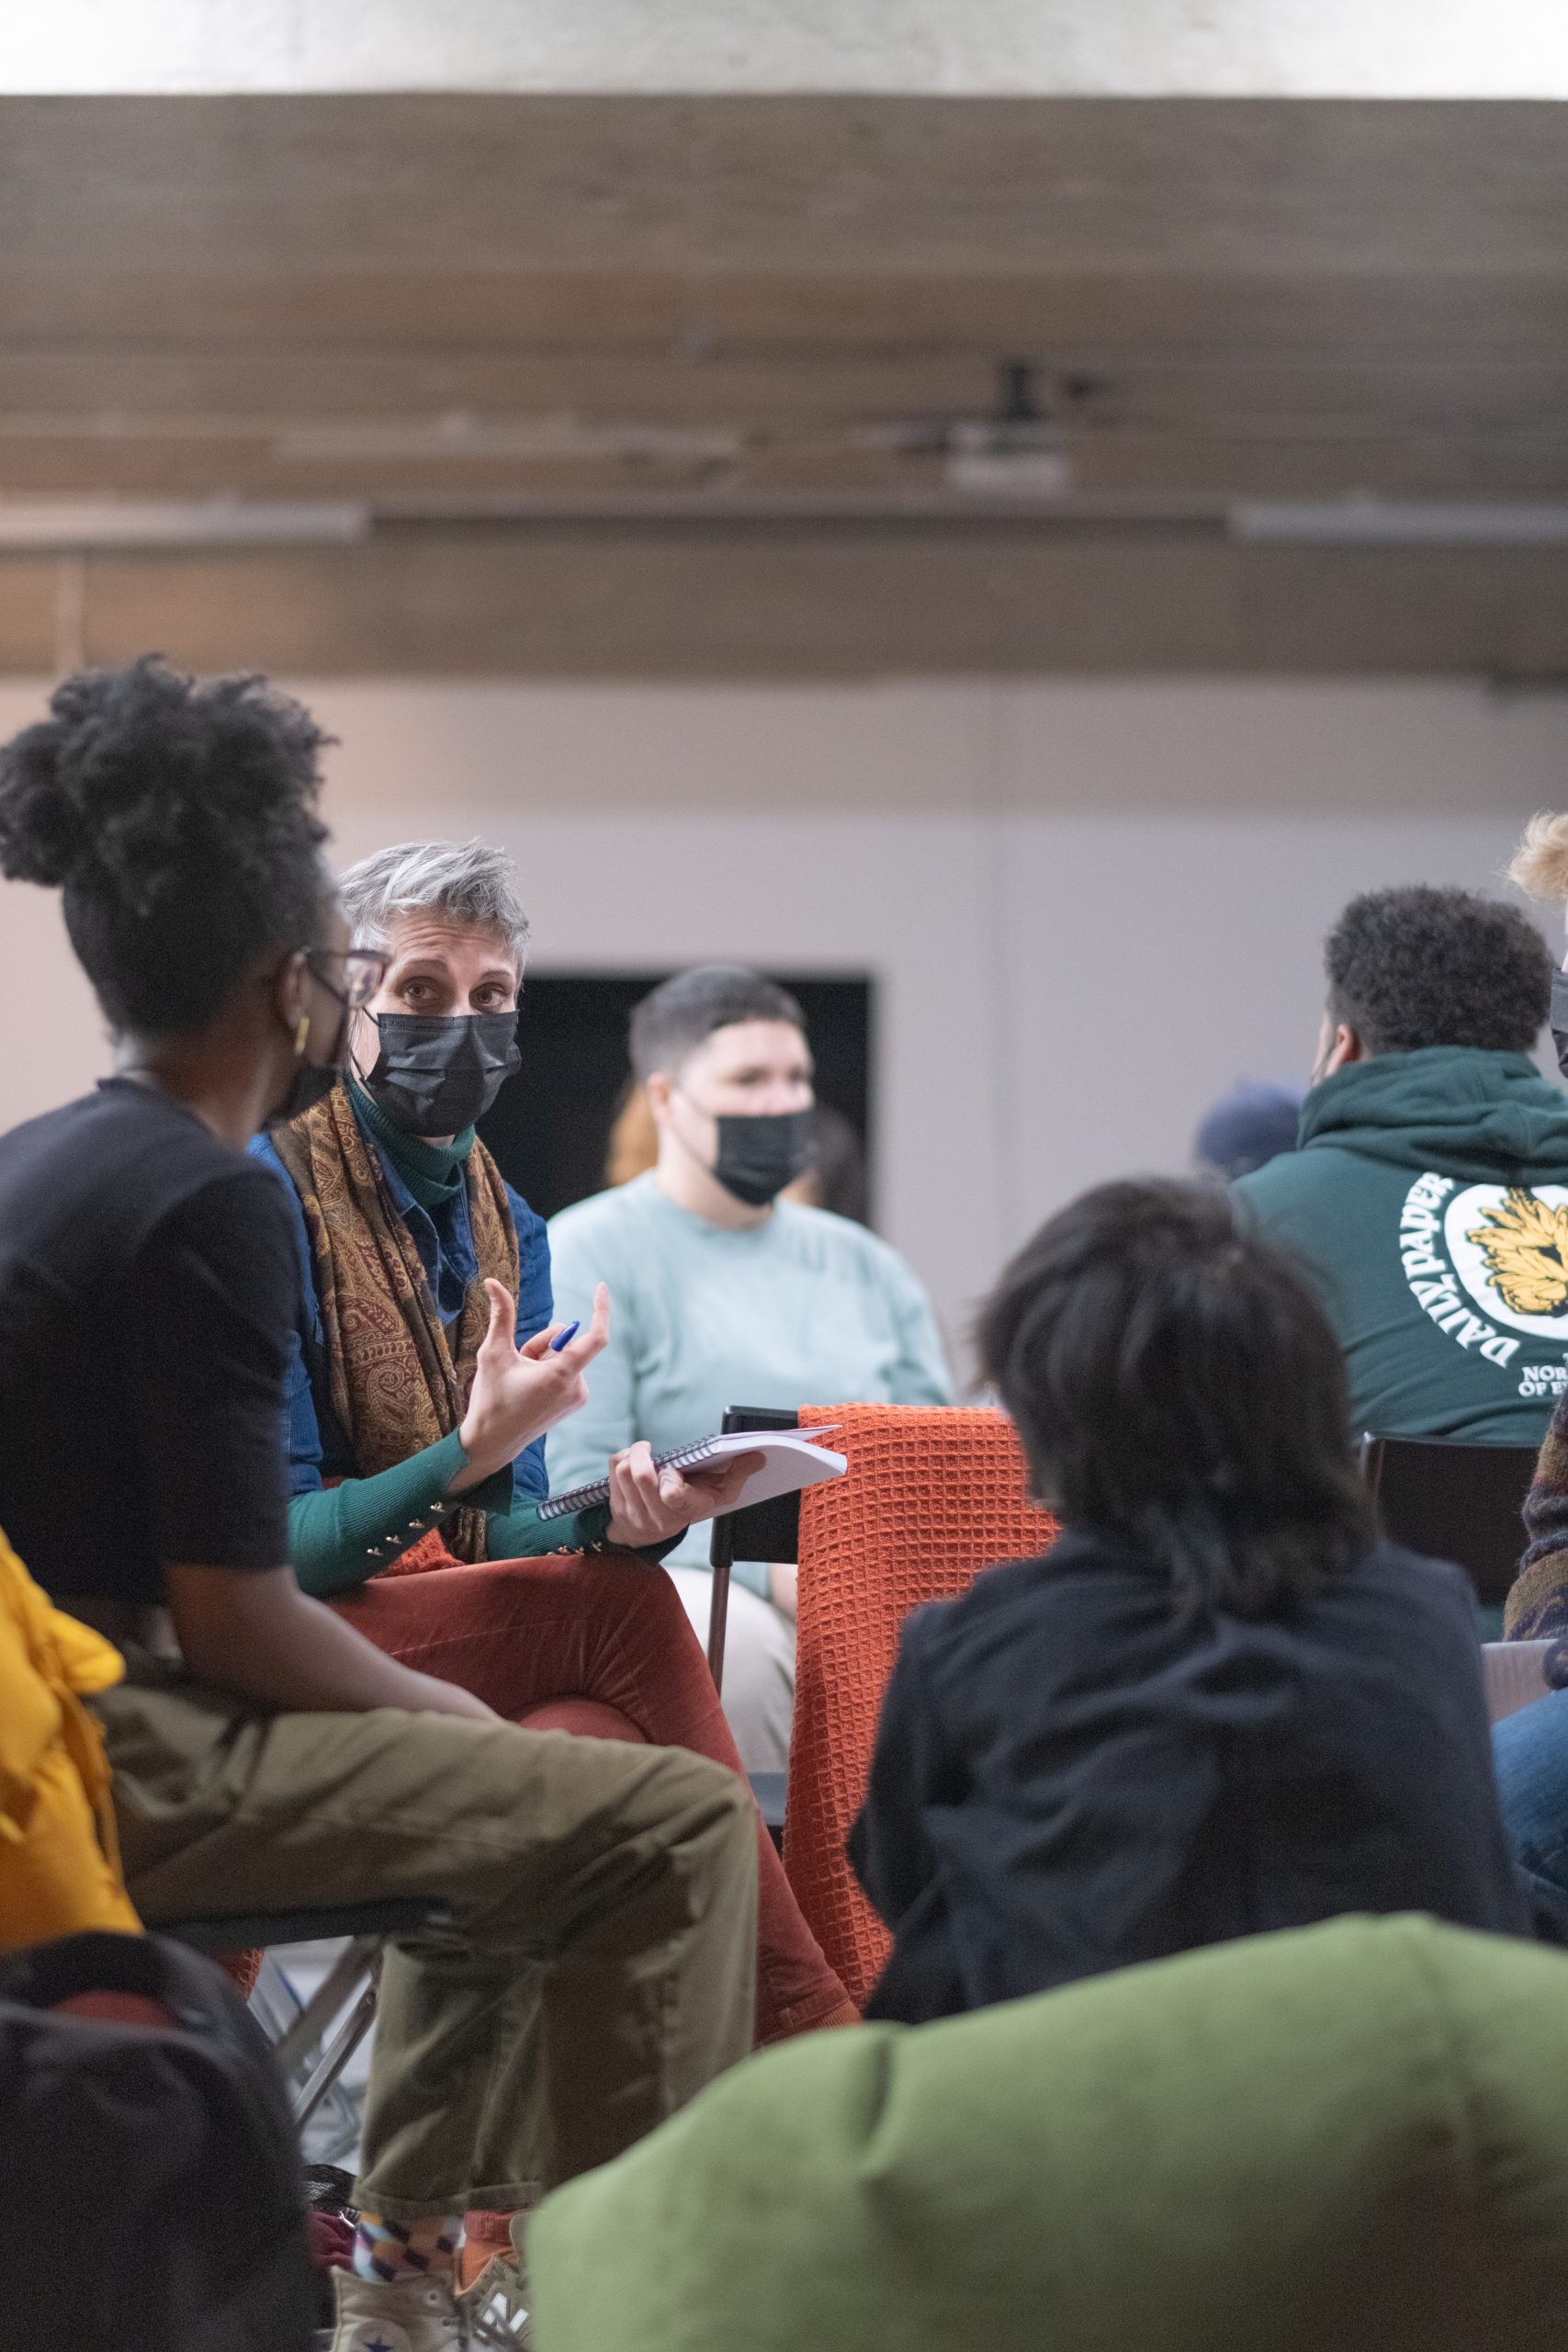 A diverse group of people in discussion, sitting down, wearing face masks.